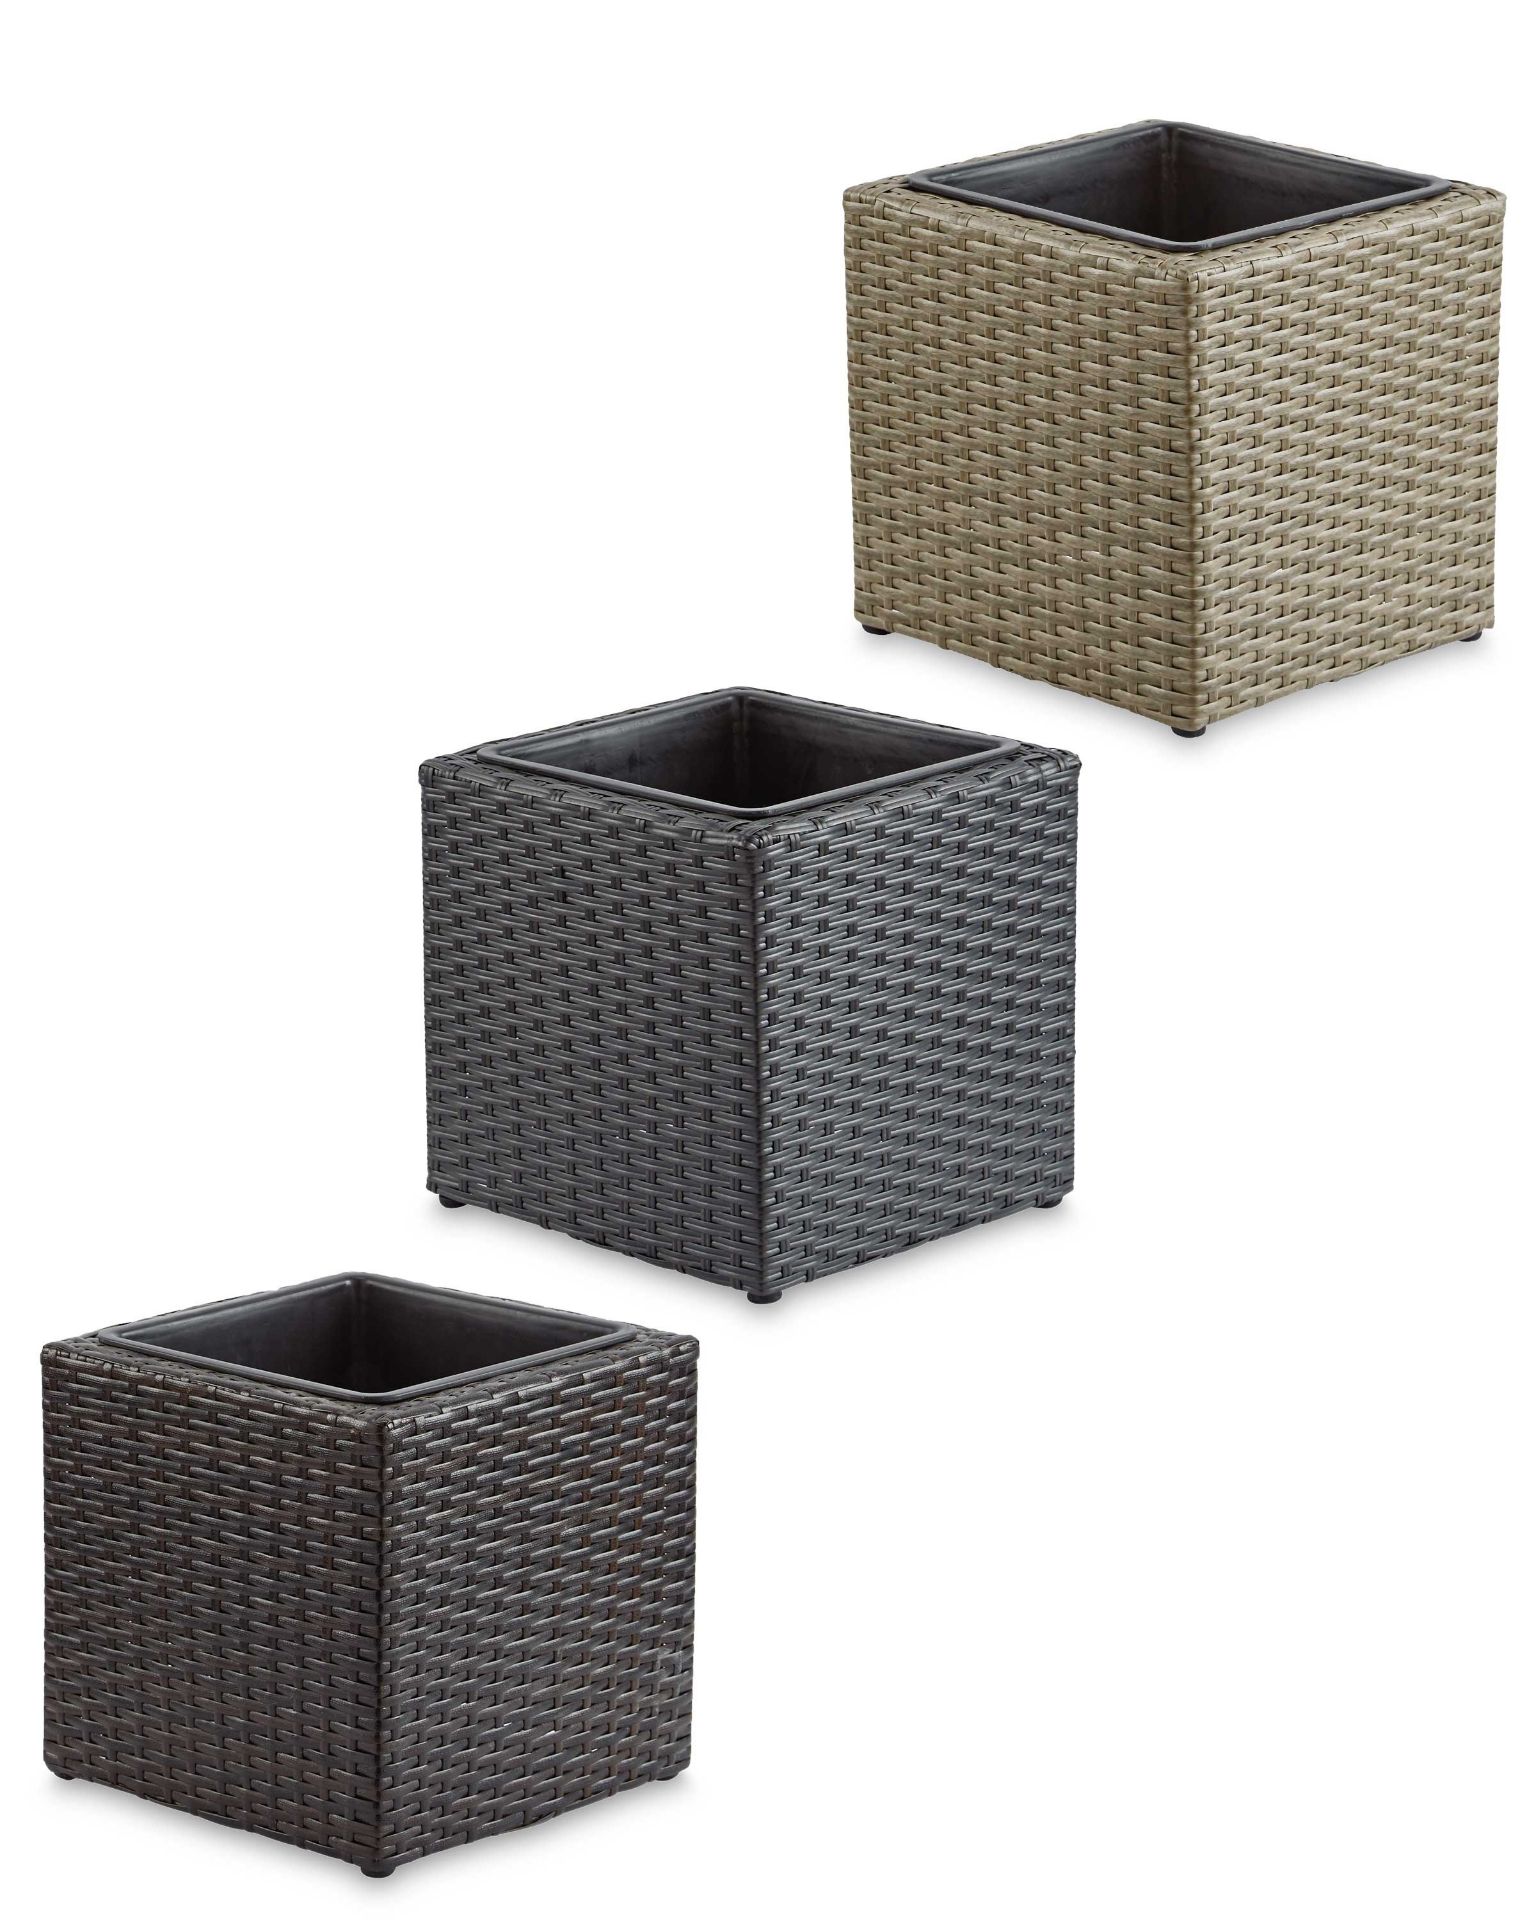 V Brand New Cube Rattan Effect Planter - Colours May Vary